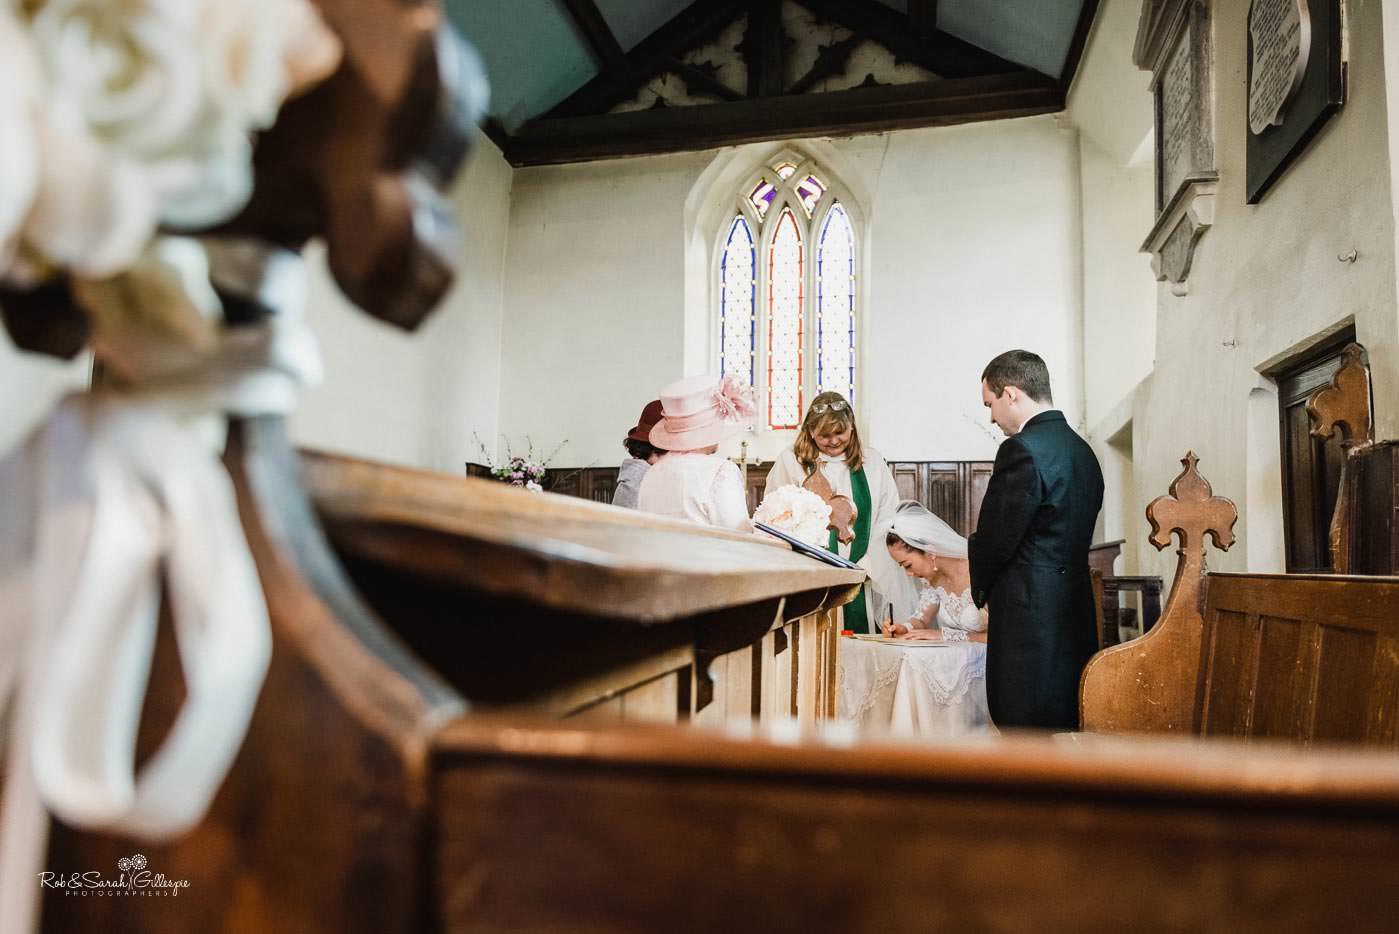 Wedding ceremony at St Peter's church Bourton-on-Dunsmore photographed by Rob & Sarah Gillespie